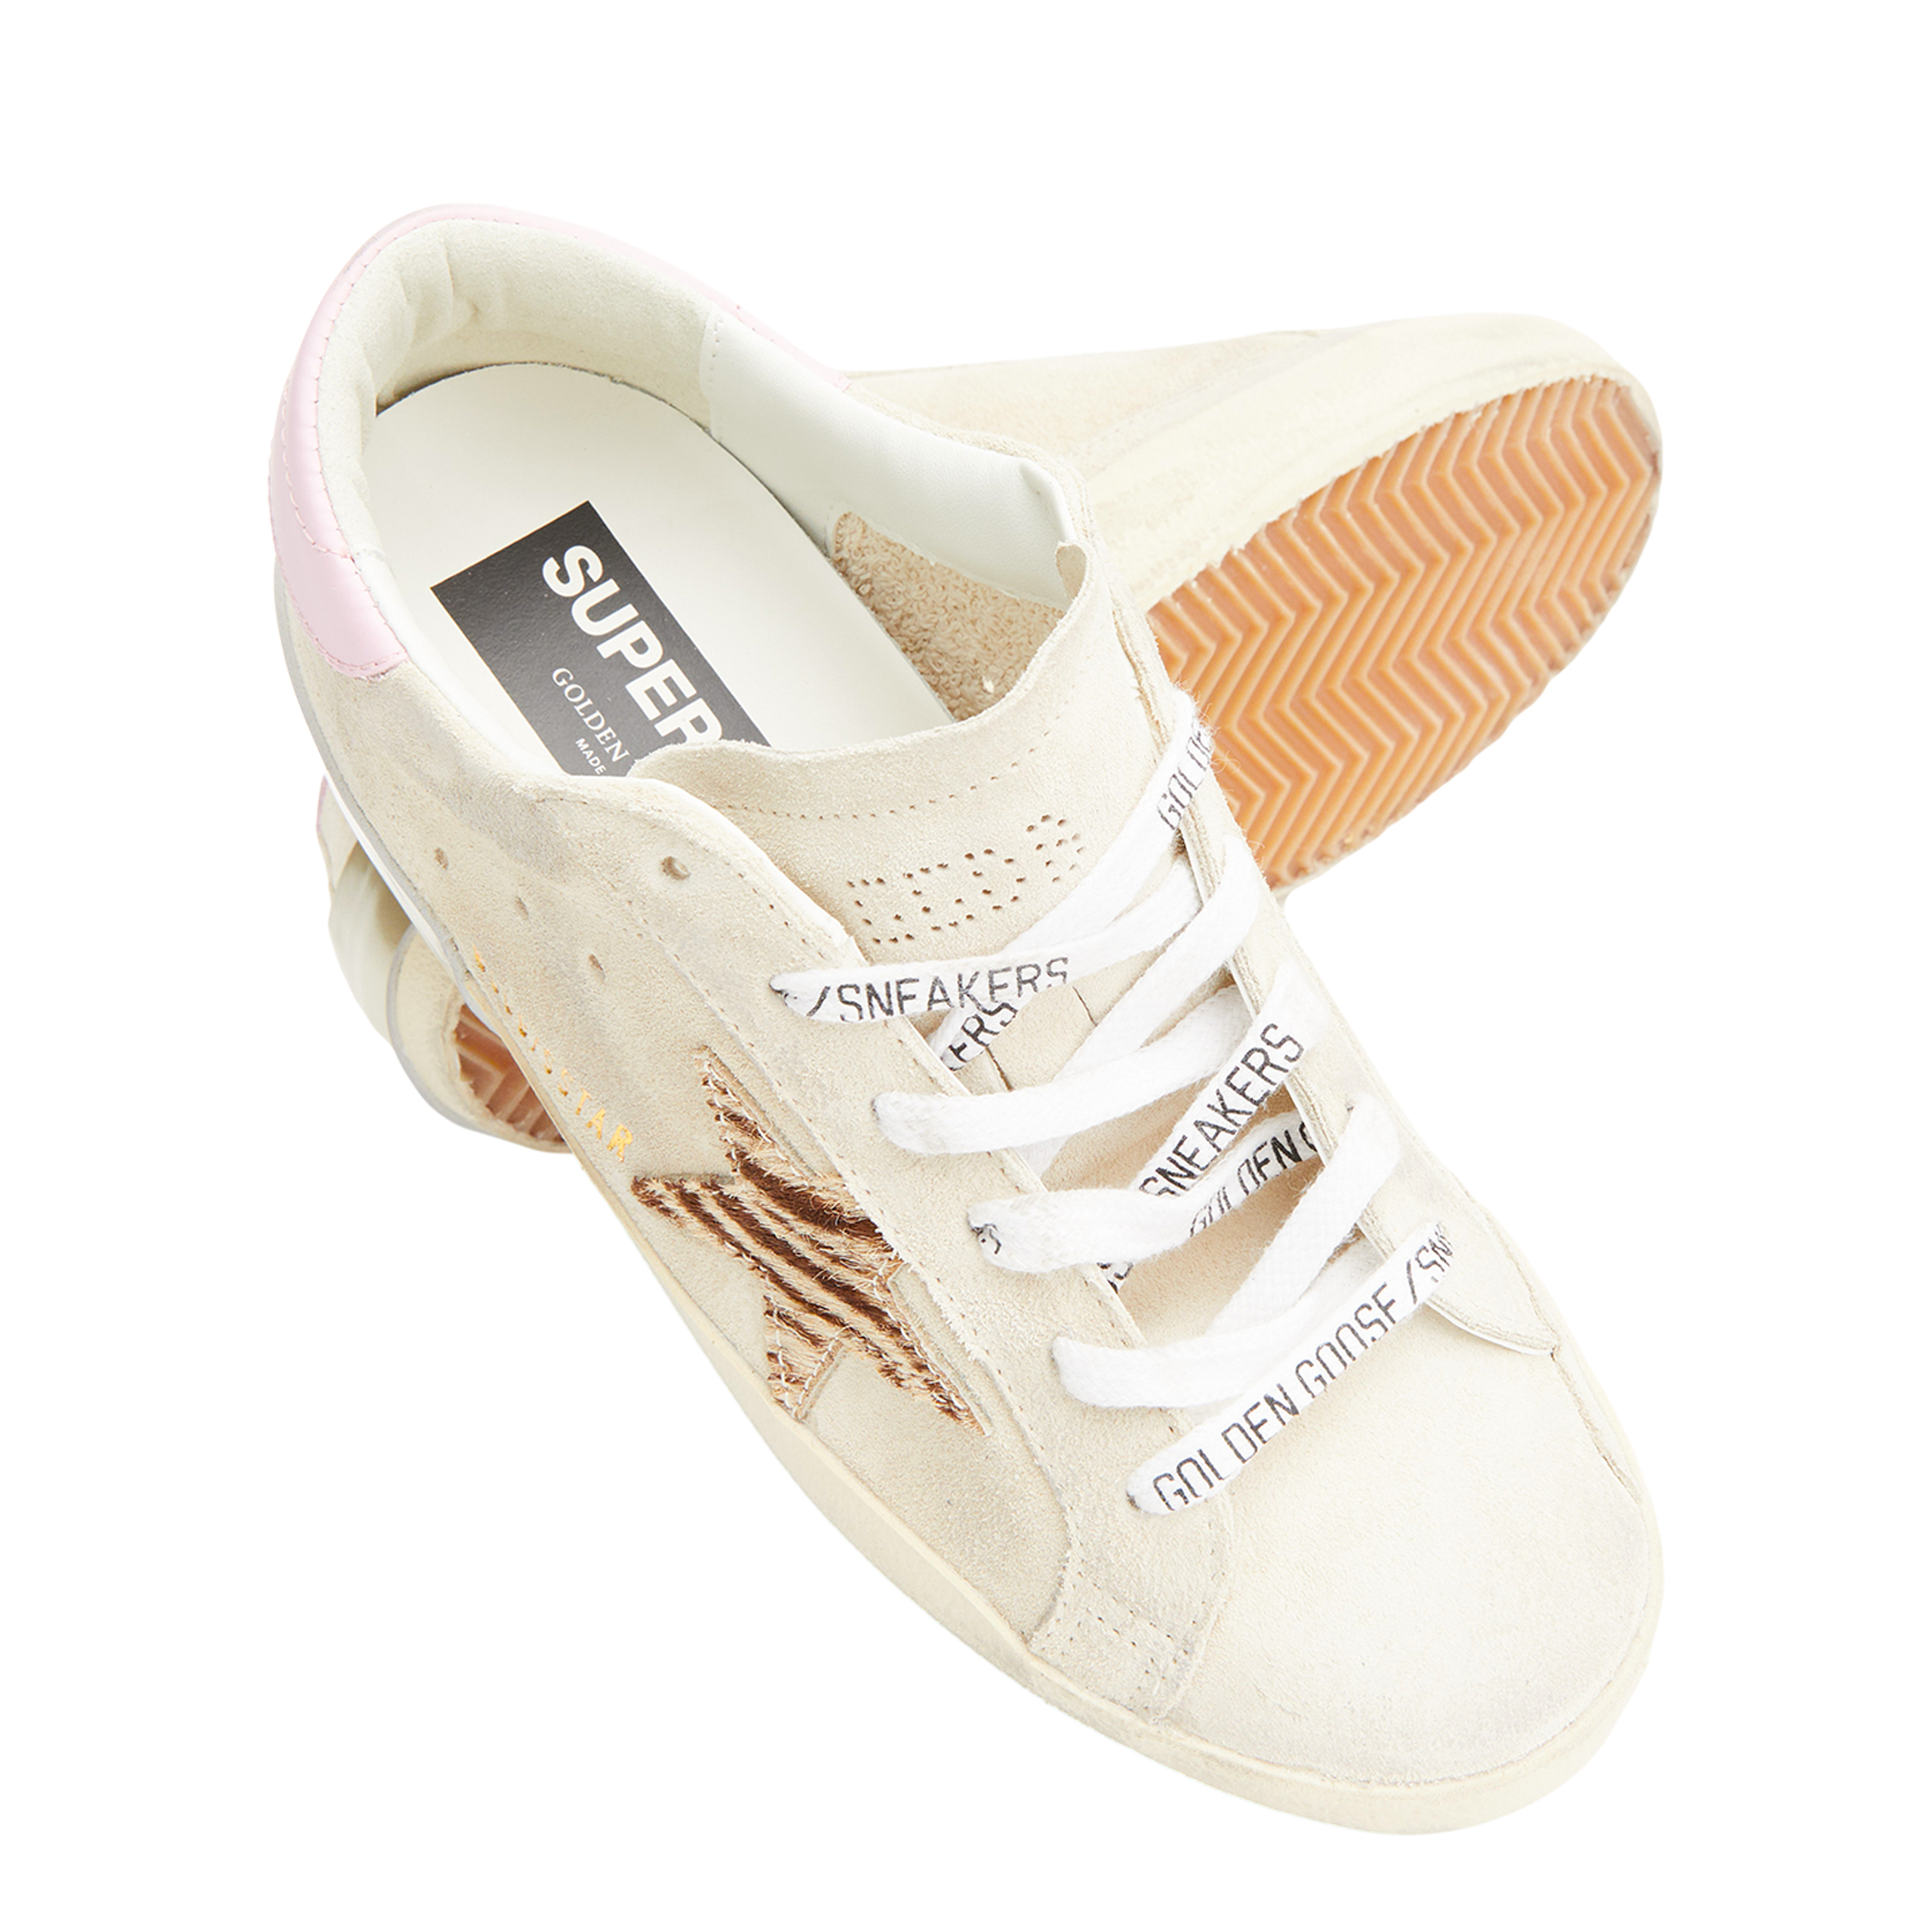 None Golden Goose Deluxe Brand GWF00587/F005436/15551, размер 36;37;38;39;40;41